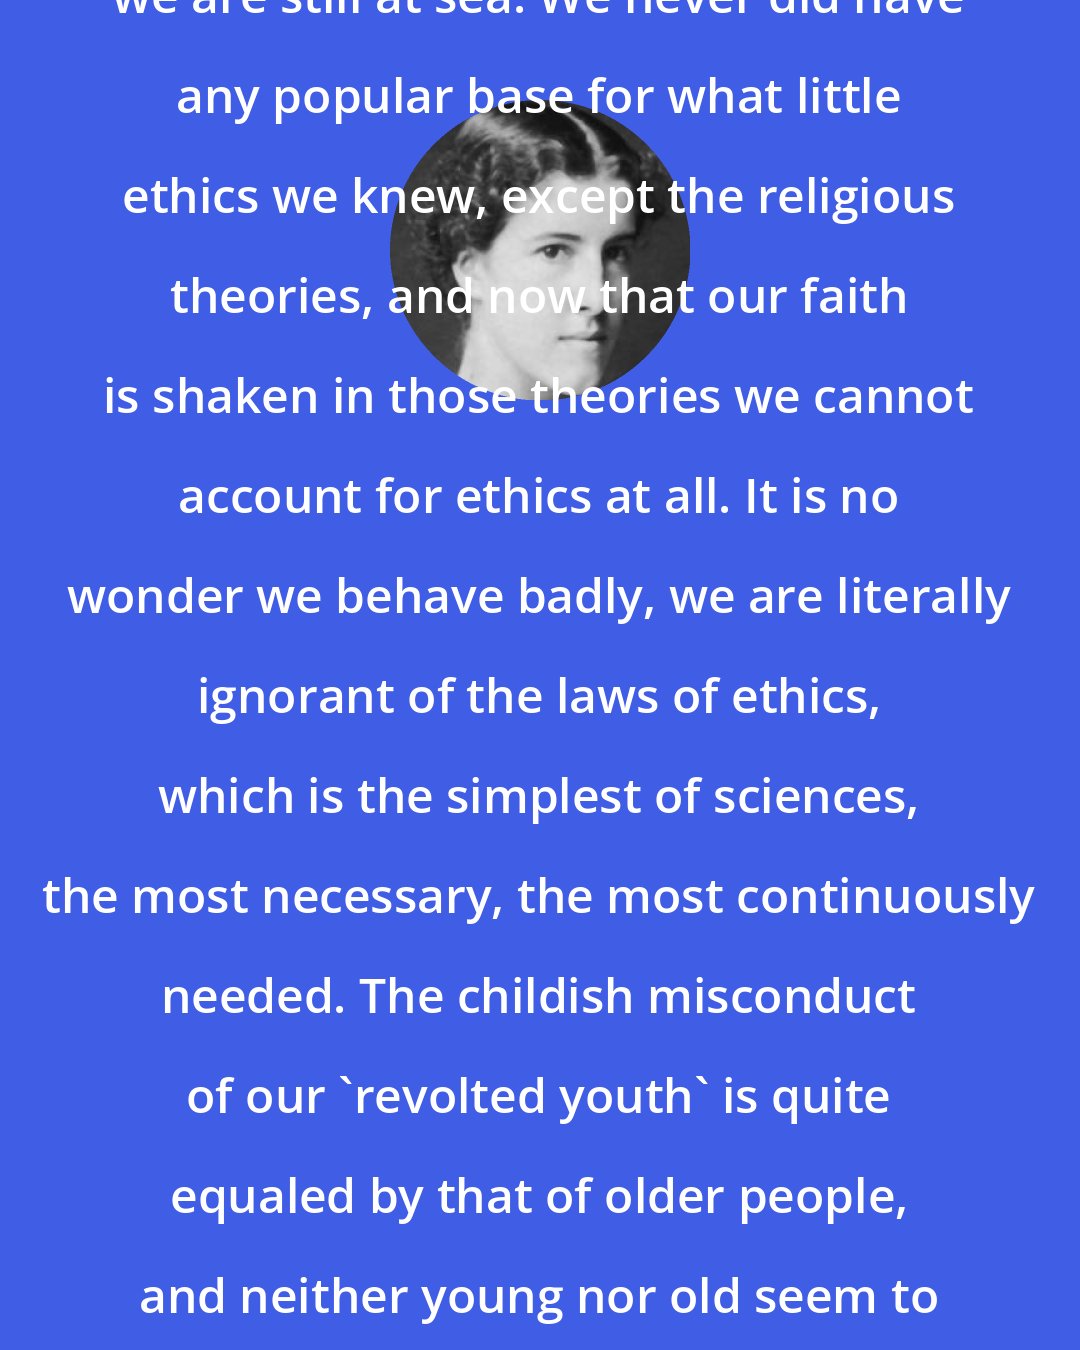 Charlotte Perkins Gilman: As to ethics, unfortunately, we are still at sea. We never did have any popular base for what little ethics we knew, except the religious theories, and now that our faith is shaken in those theories we cannot account for ethics at all. It is no wonder we behave badly, we are literally ignorant of the laws of ethics, which is the simplest of sciences, the most necessary, the most continuously needed. The childish misconduct of our 'revolted youth' is quite equaled by that of older people, and neither young nor old seem to have any understanding of the reasons why conduct is 'good' or 'bad.